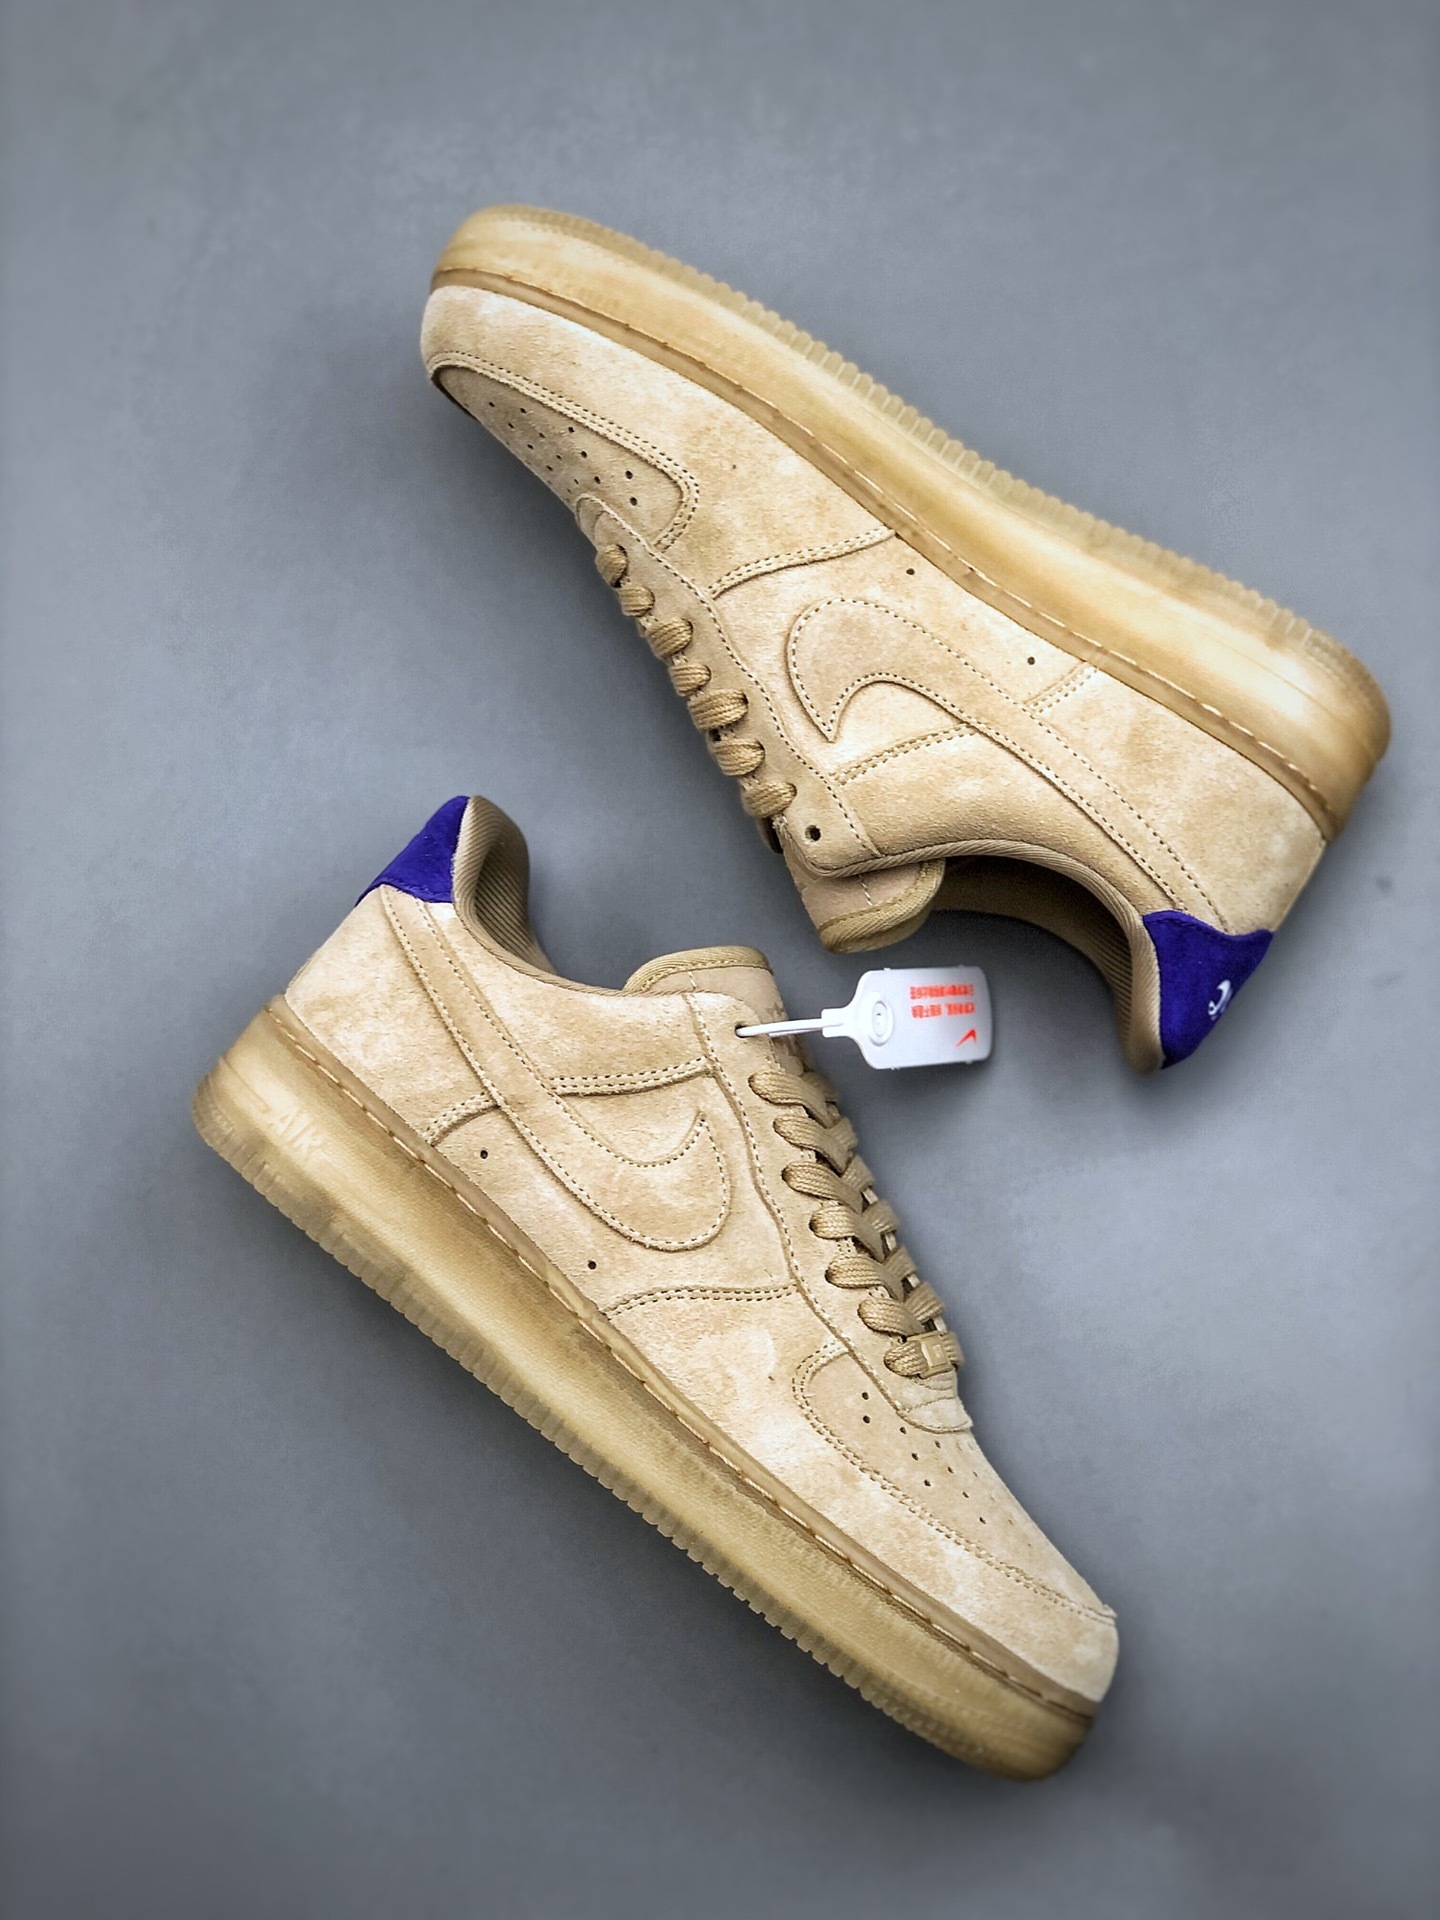 Nike Air Force 1 '07 low "Grain". Purchase the best quality and price of the Nike Air Force 1 online. Nike Air Force 1 Low 07 . Purchase the best quality and price of the Nike Air Force 1 online. 30,Nike Air Force 1 Low 07 x BAPE,Nike,shoes